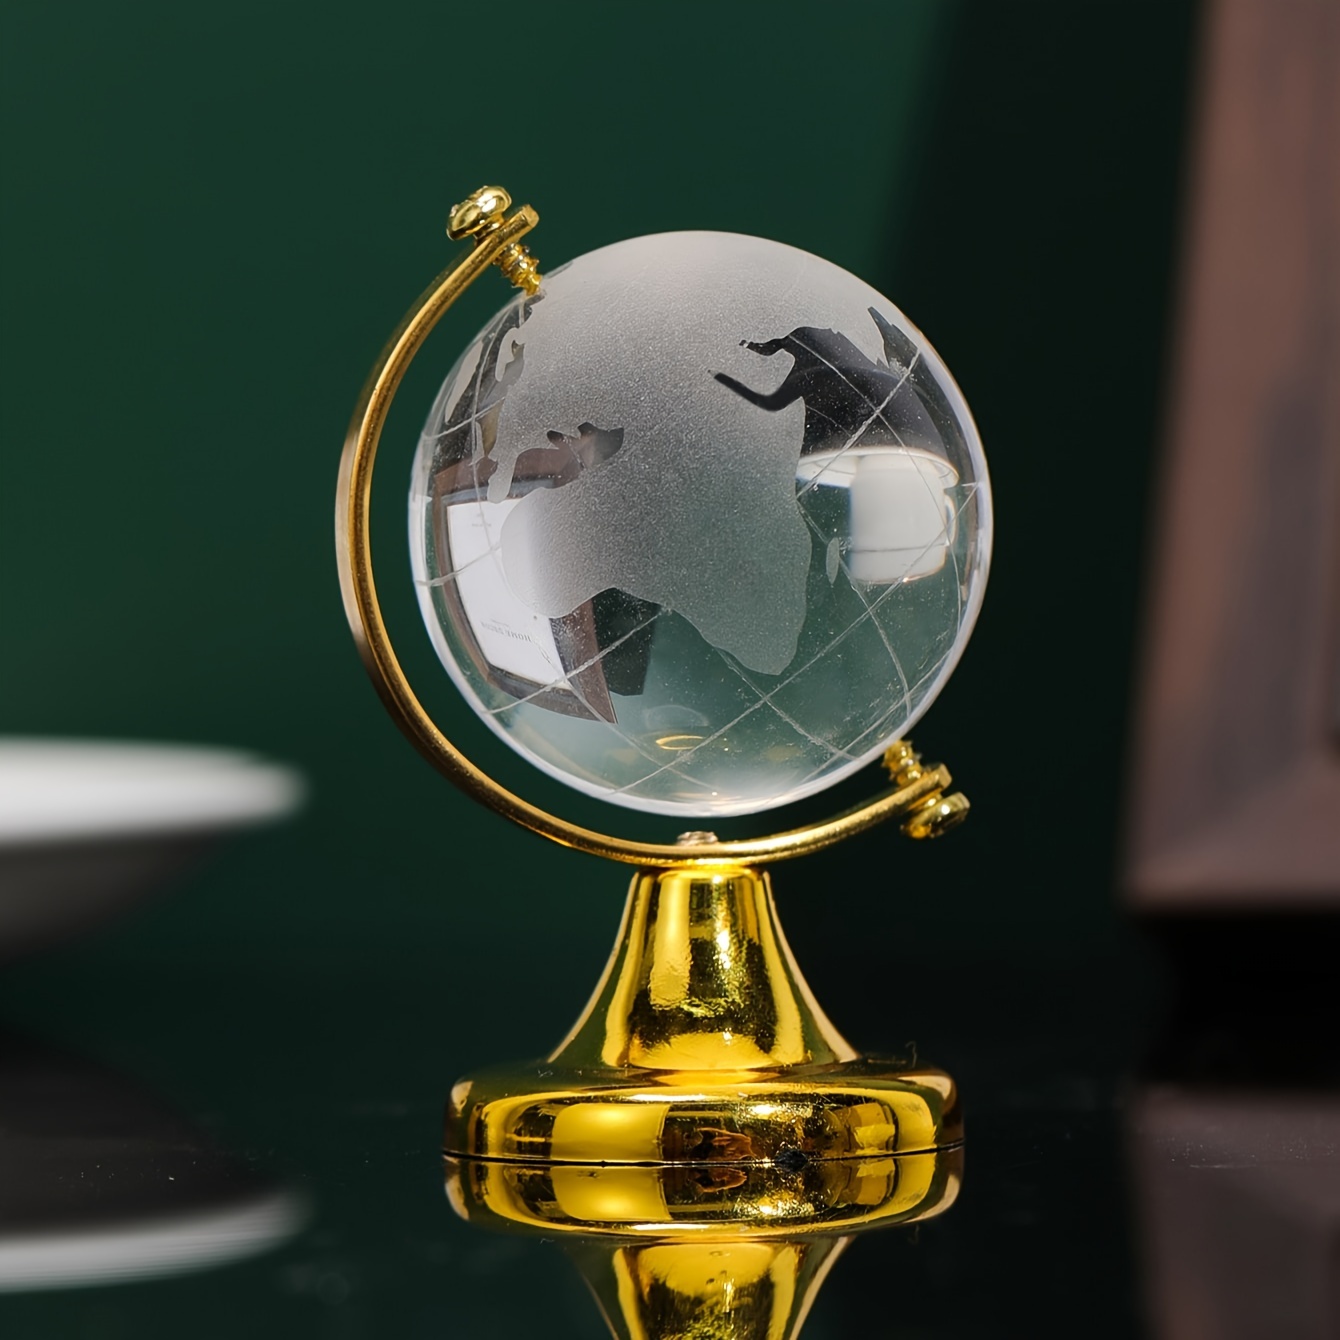 Automatic lifting Magnetic Levitation Floating Globe Anti Gravity Rotating  World Map with LED Light for Educational Gift Home Office Desk Decoration